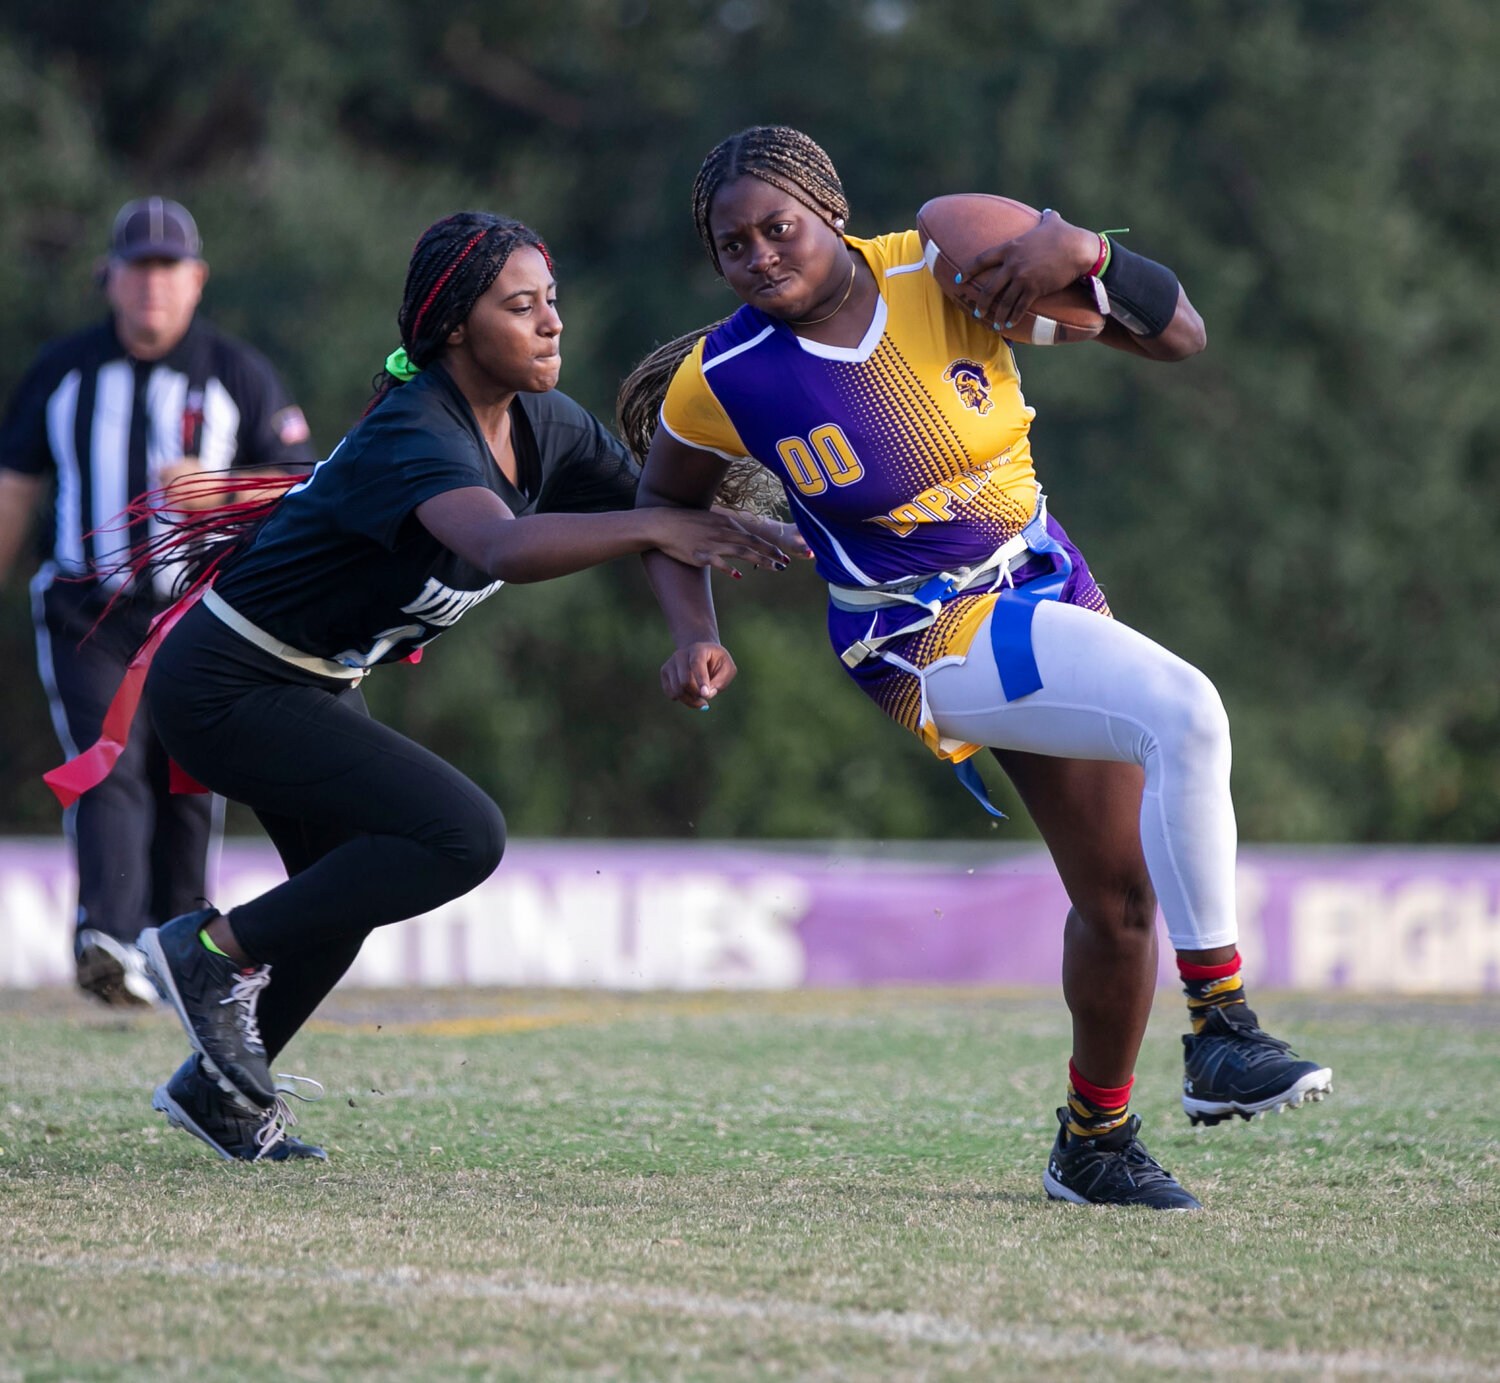 Daphne junior Vic Moten maneuvers around an MGM tackler on a first-half carry during the Trojans’ playoff game against the Vikings at Jubilee Stadium on Monday, Oct. 30. The Alabama softball commit delivered the go-ahead score in the nightcap to help Daphne take down Alma-Bryant 13-7 and advance to the Elite Eight state tournament in its first season.